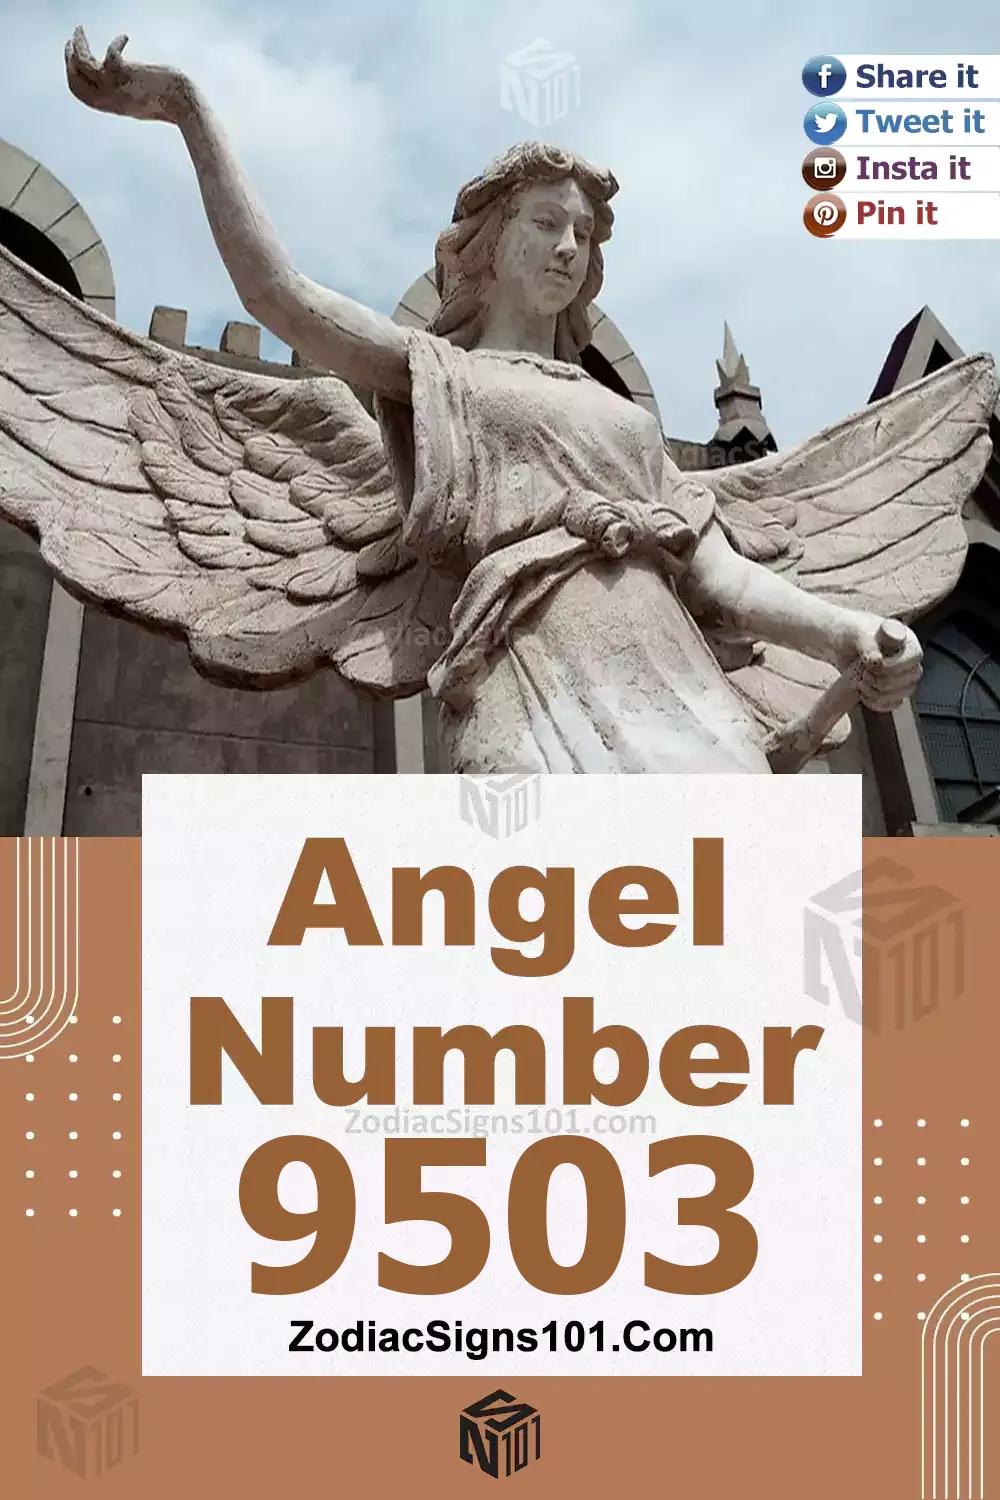 9503 Angel Number Meaning